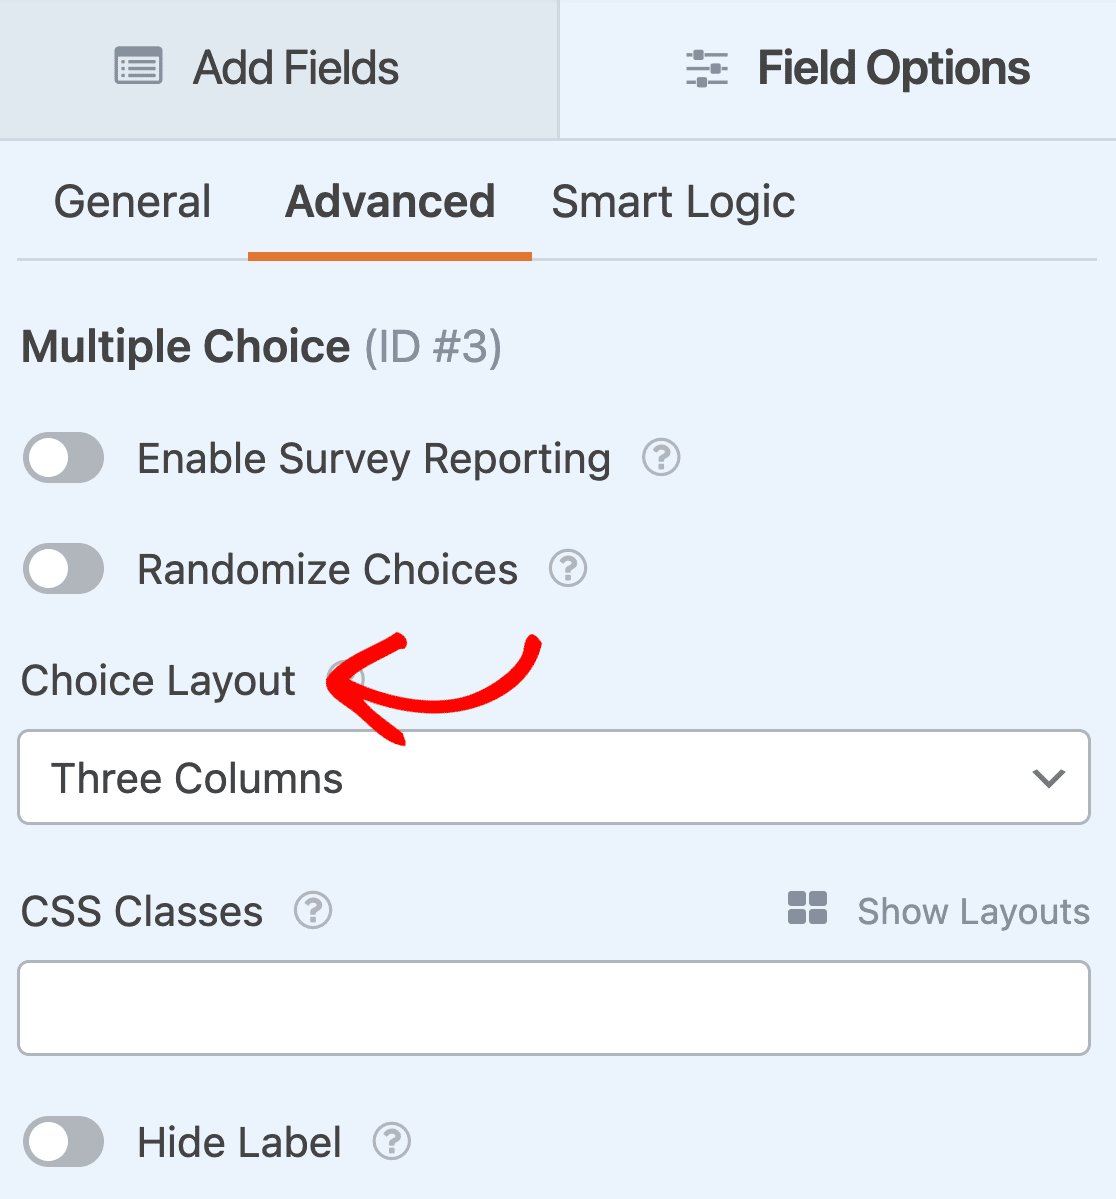 The Advanced options for the Multiple Choice field